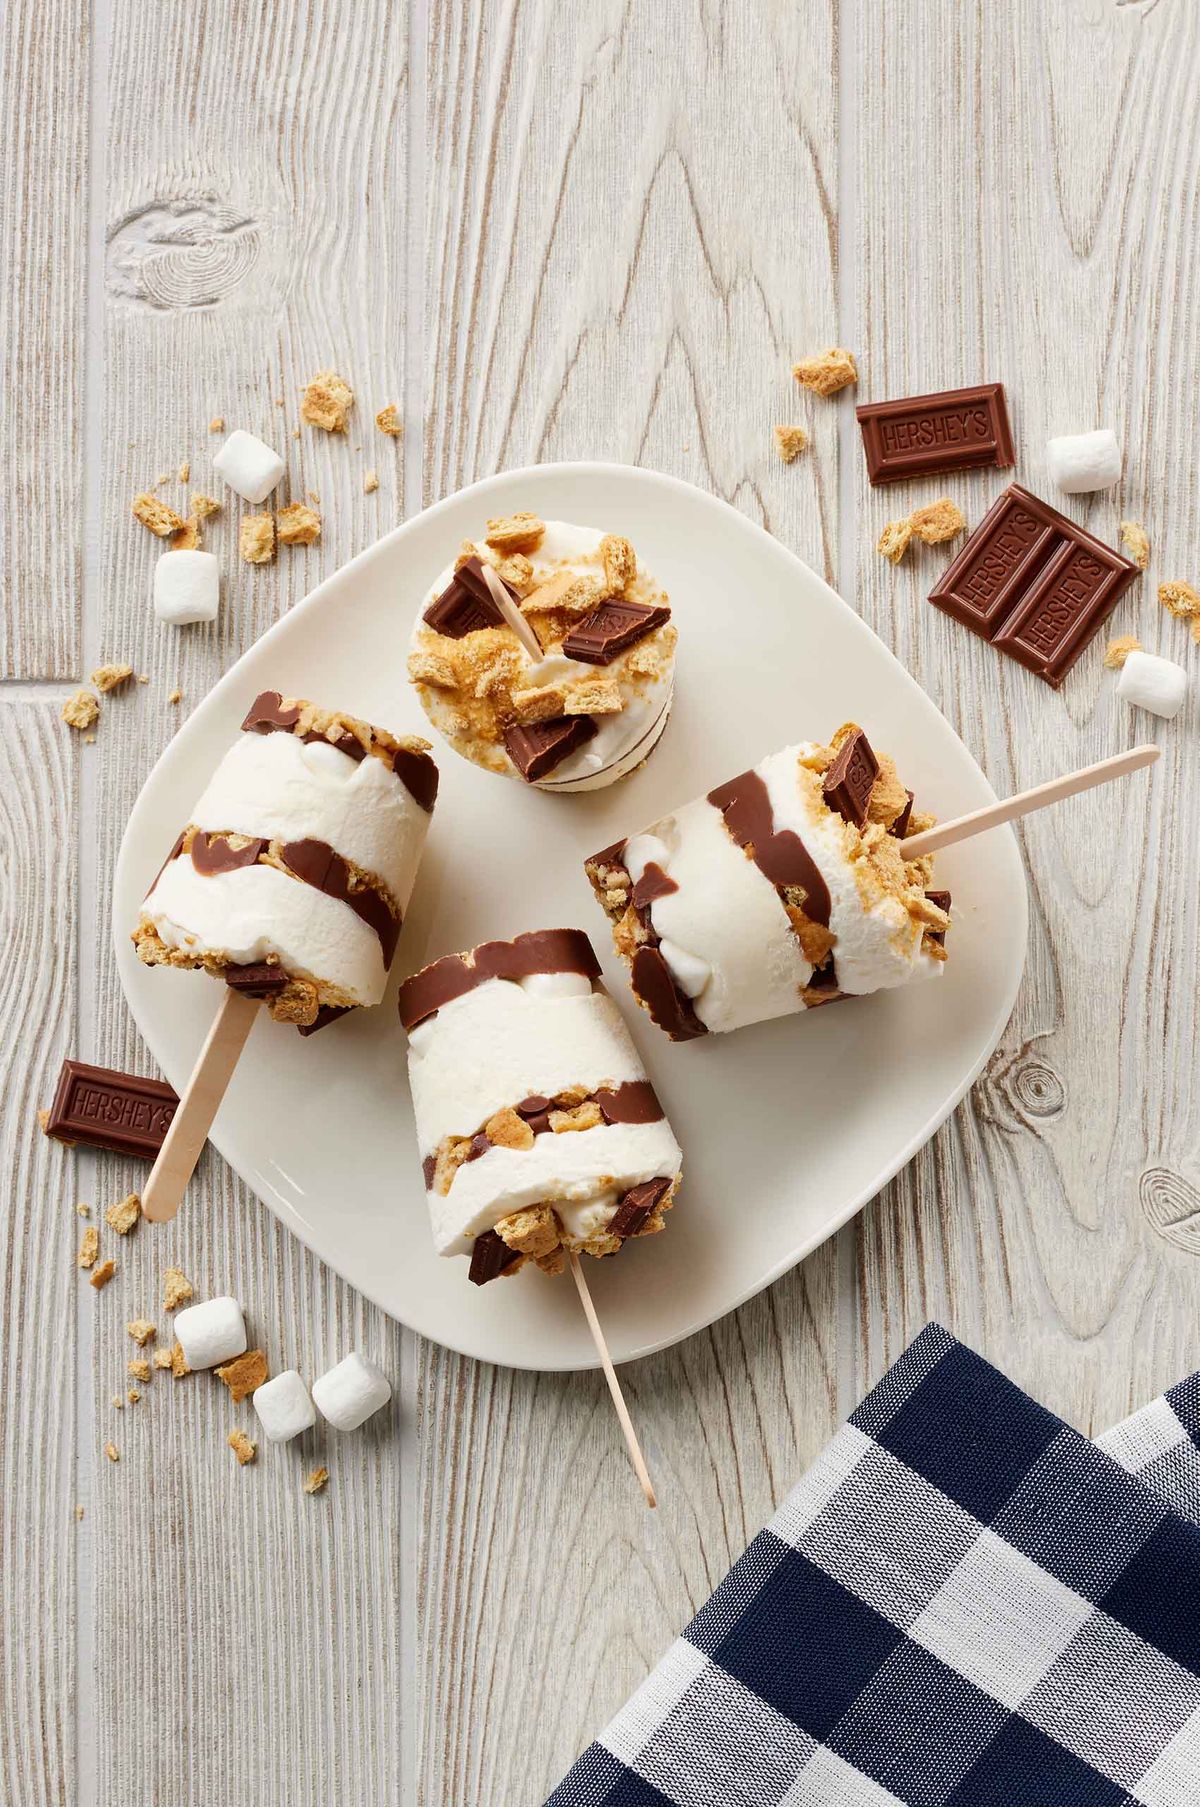 S'more Frozen Ice Cream Pops By Chicago Commercial Photographer Jeff Schear